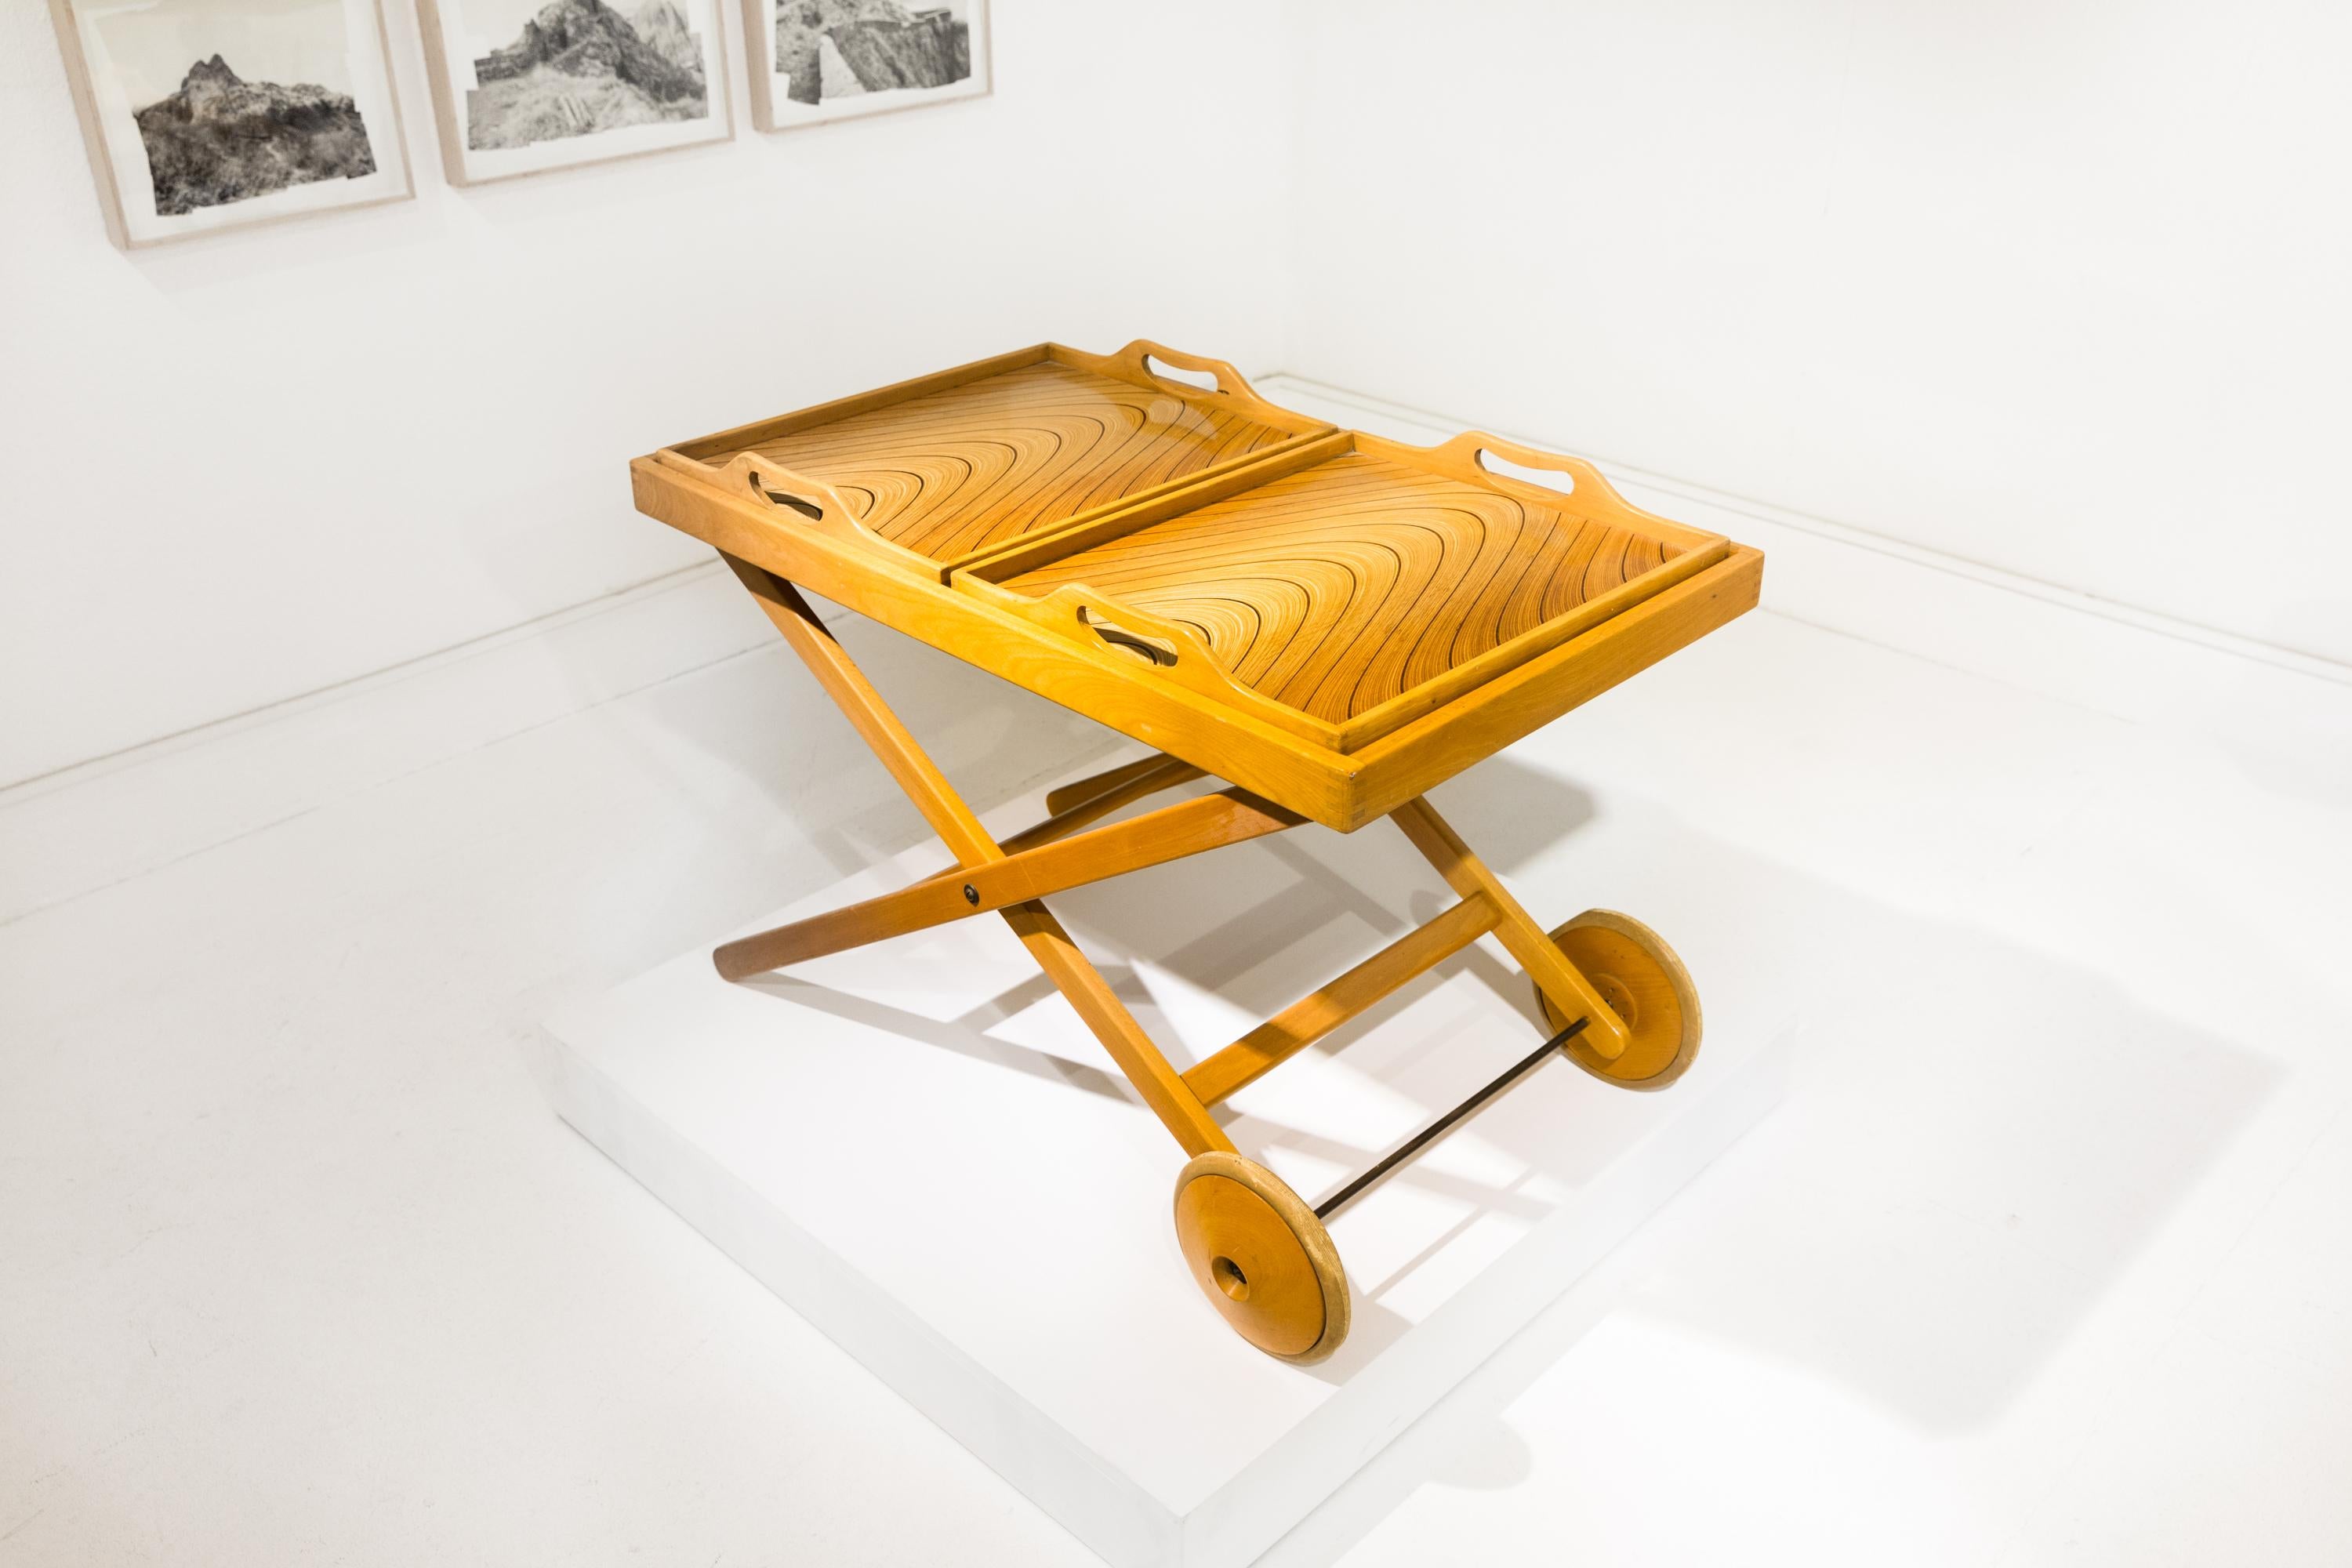 Beautiful tea trolley or serving cart by Tapio Wirkkala & Aulis Leinonen for Asko. Two detachable serving trays on the top. Lacquered birchwood.

For Asko, Finland, 1950-1951.

